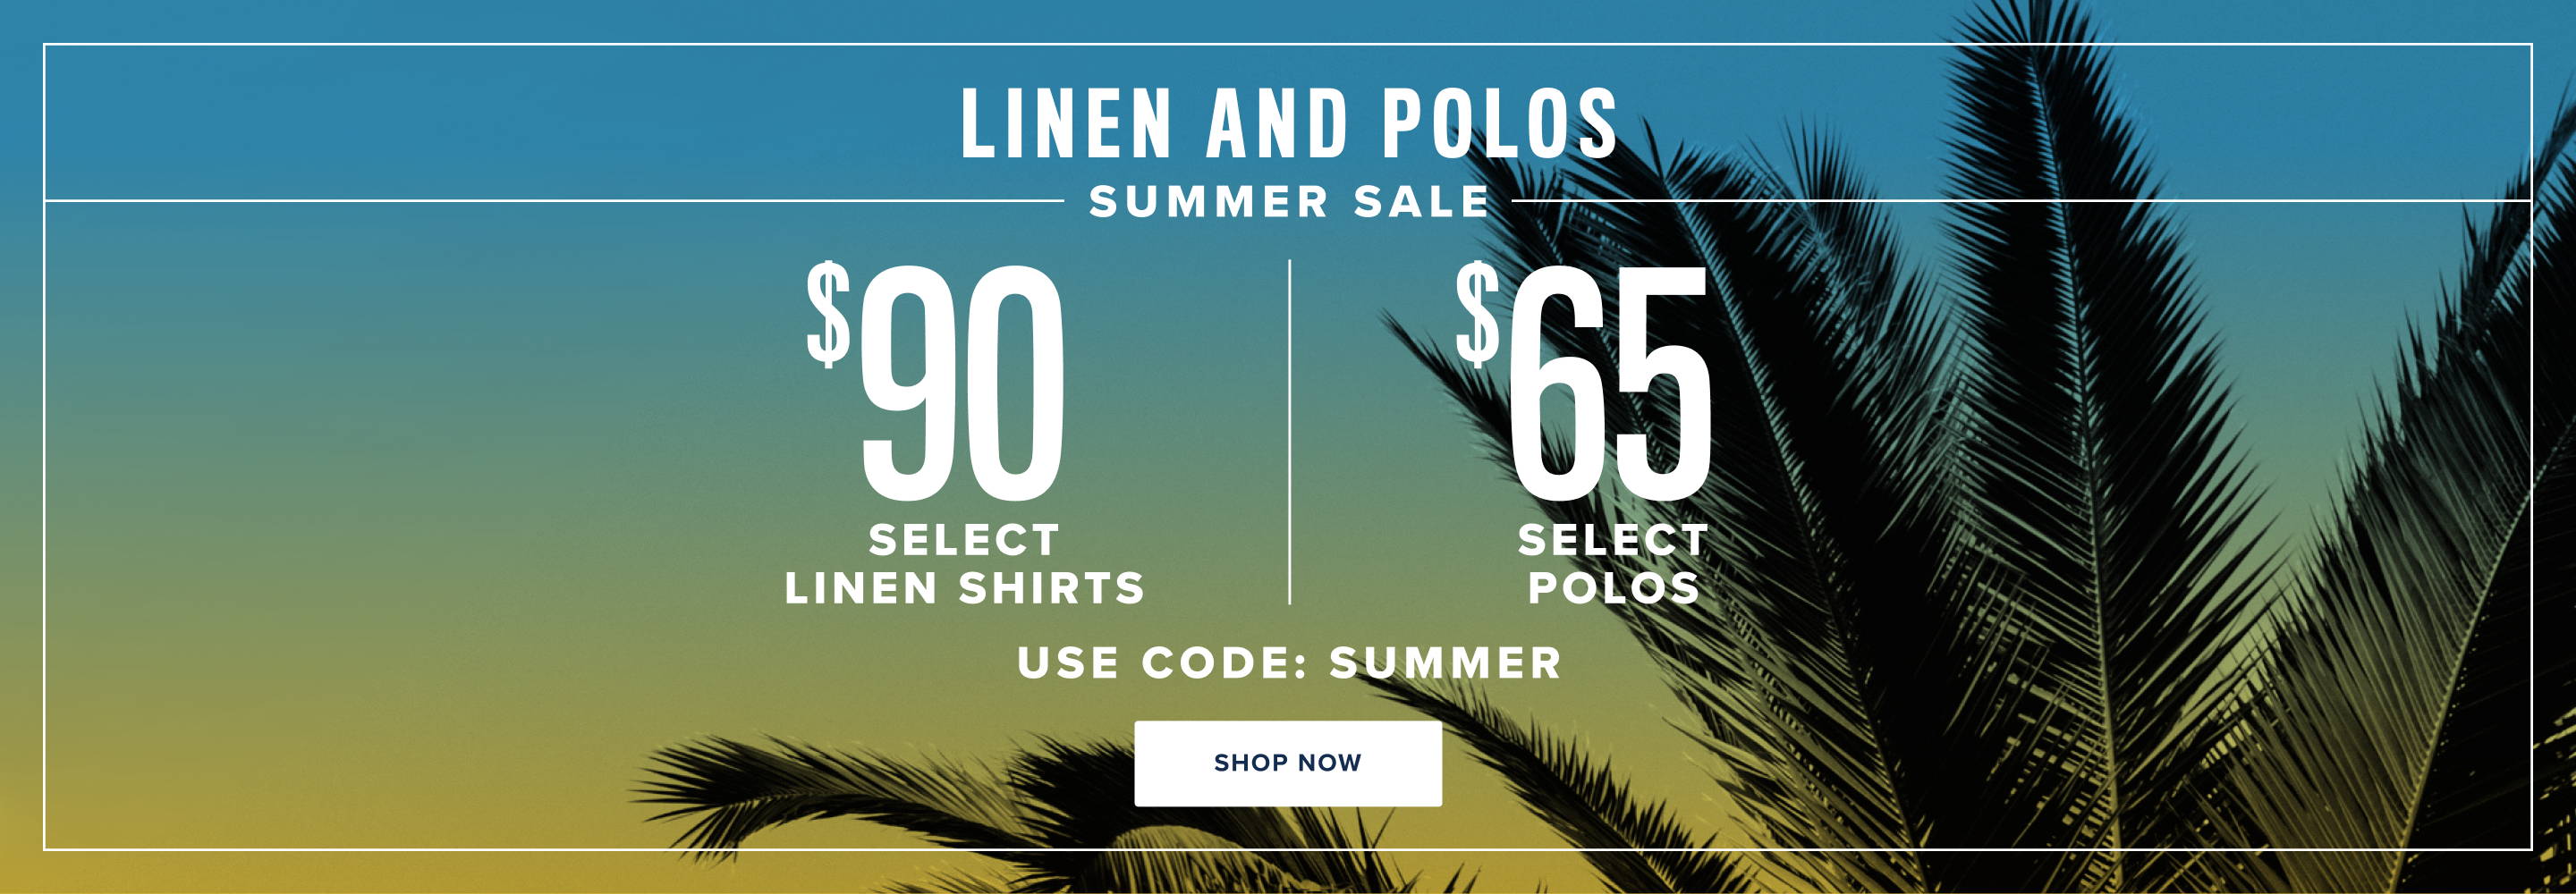 Linen and Polos Summer Sale.